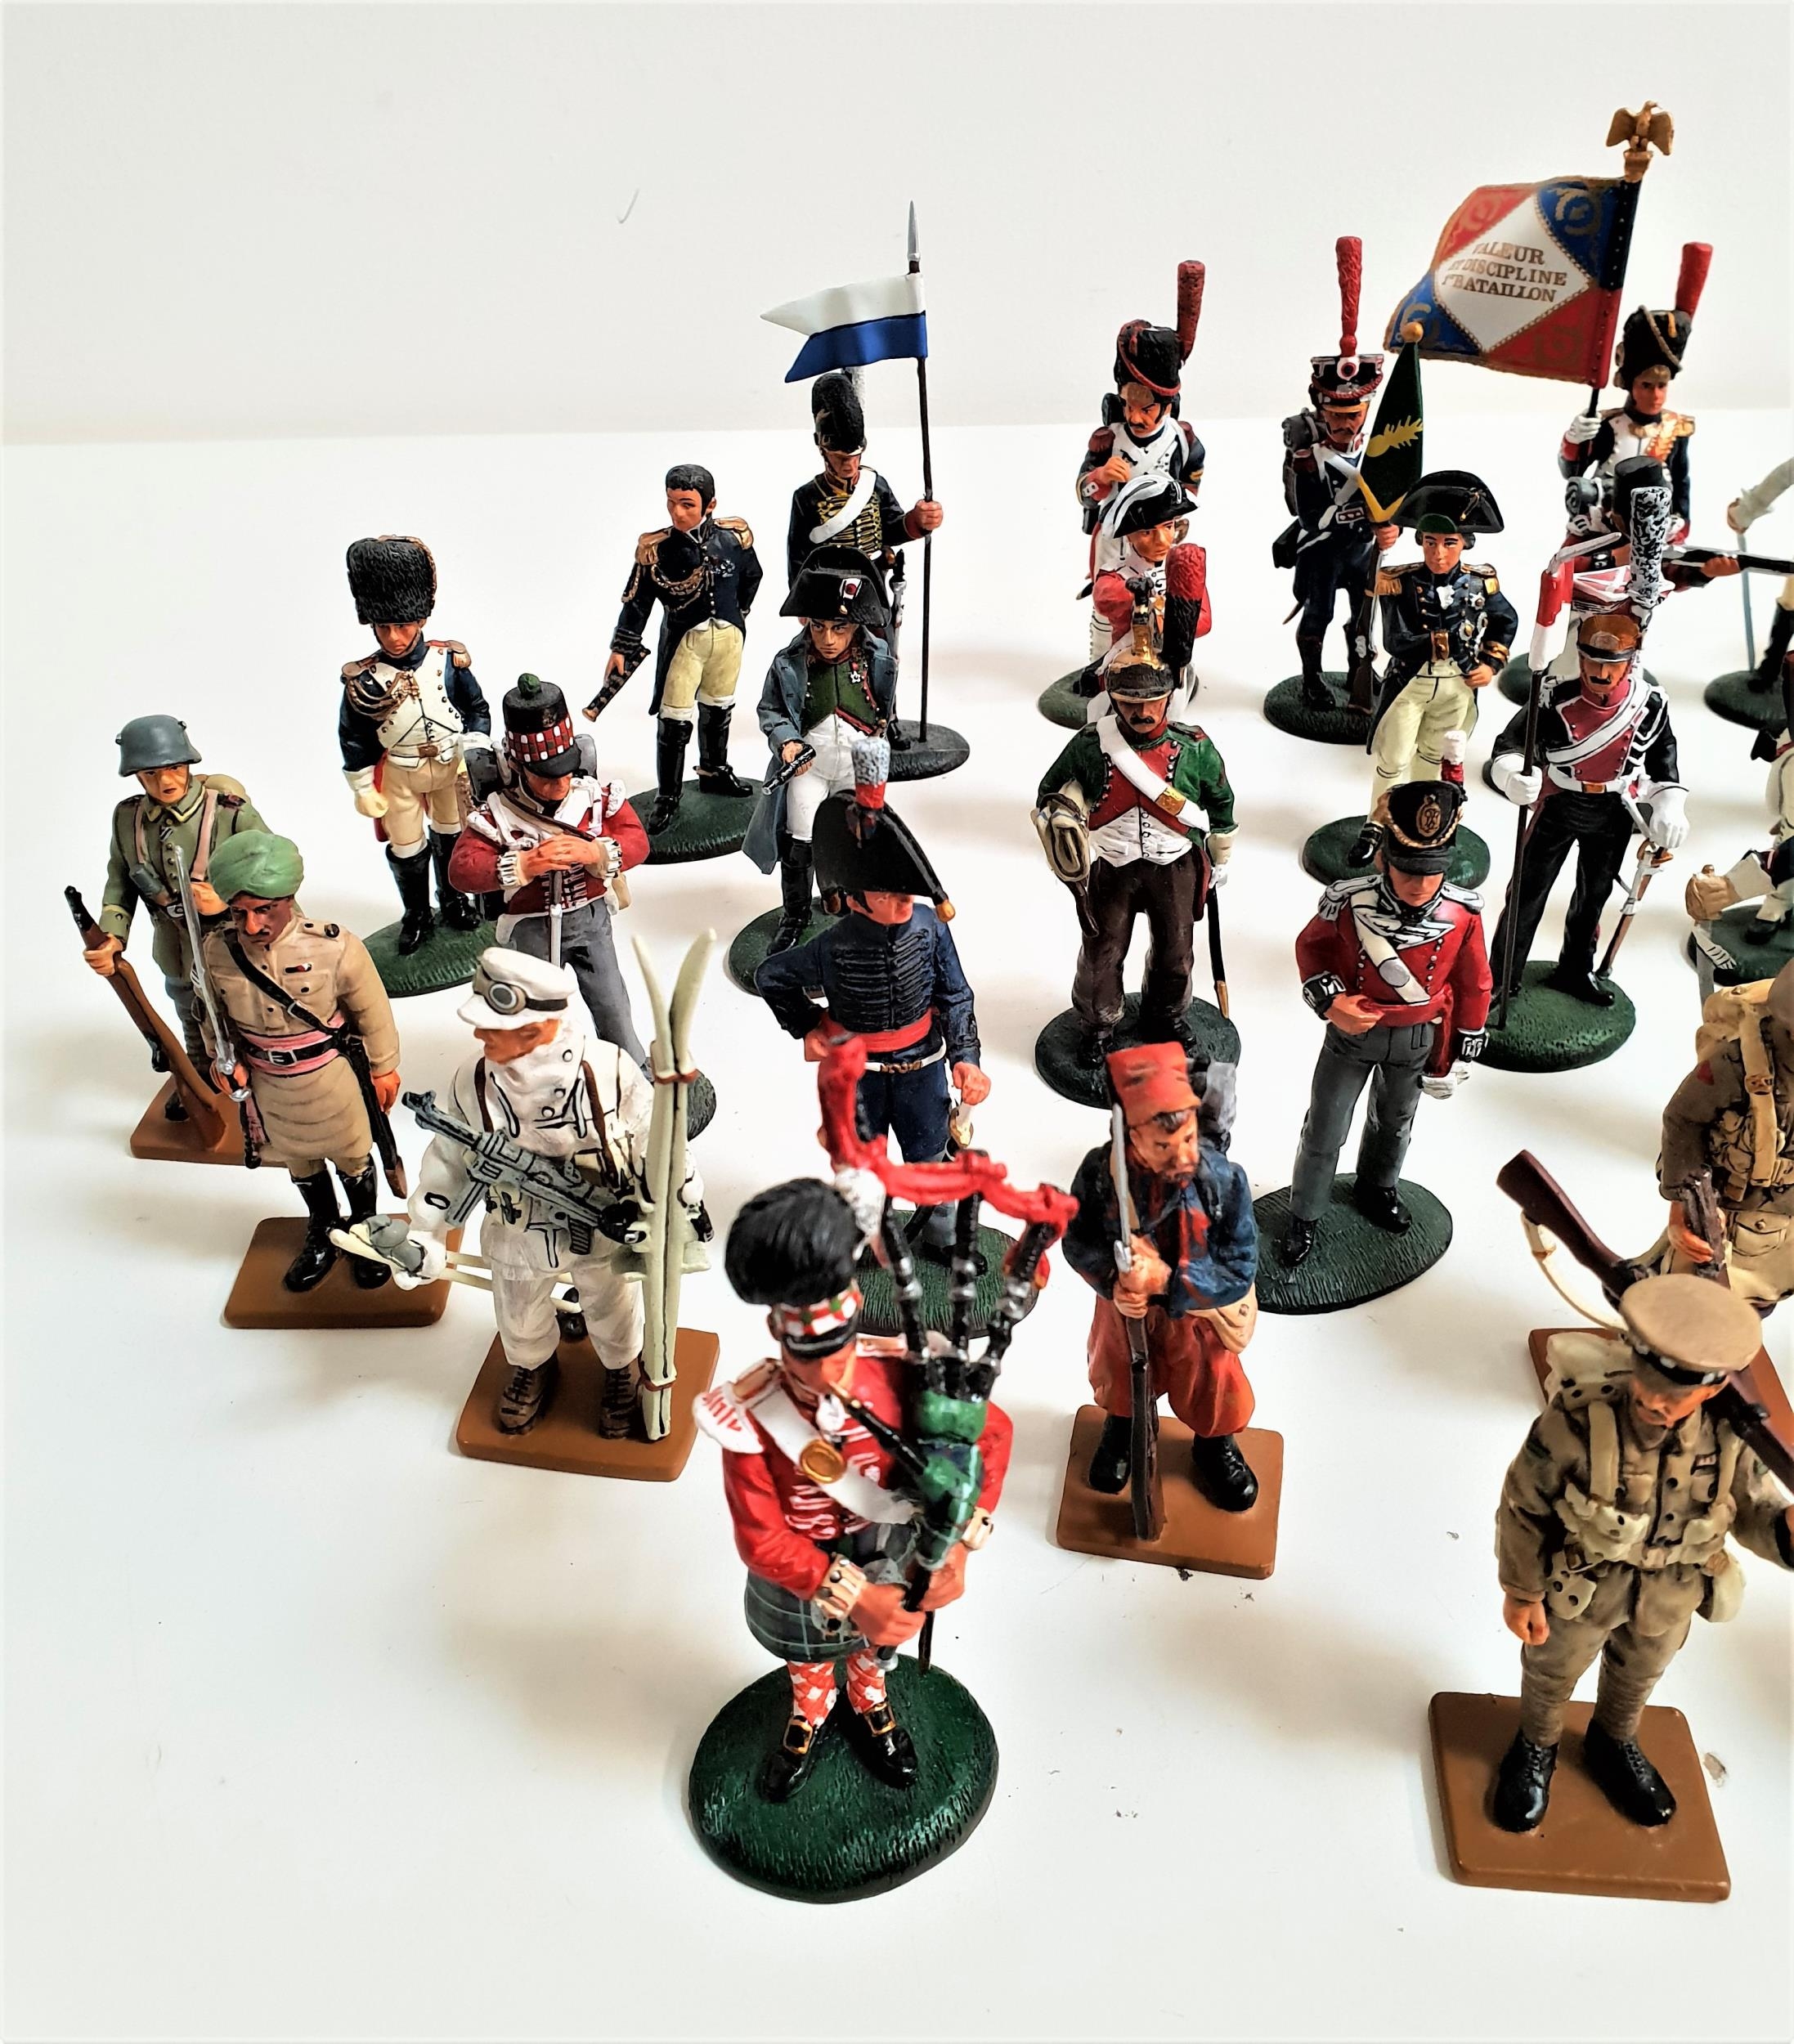 SELECTION OF DEL PRADO DIE CAST FIGURES including Vice Admiral Lord Horatio Nelson, Duke of - Image 2 of 4